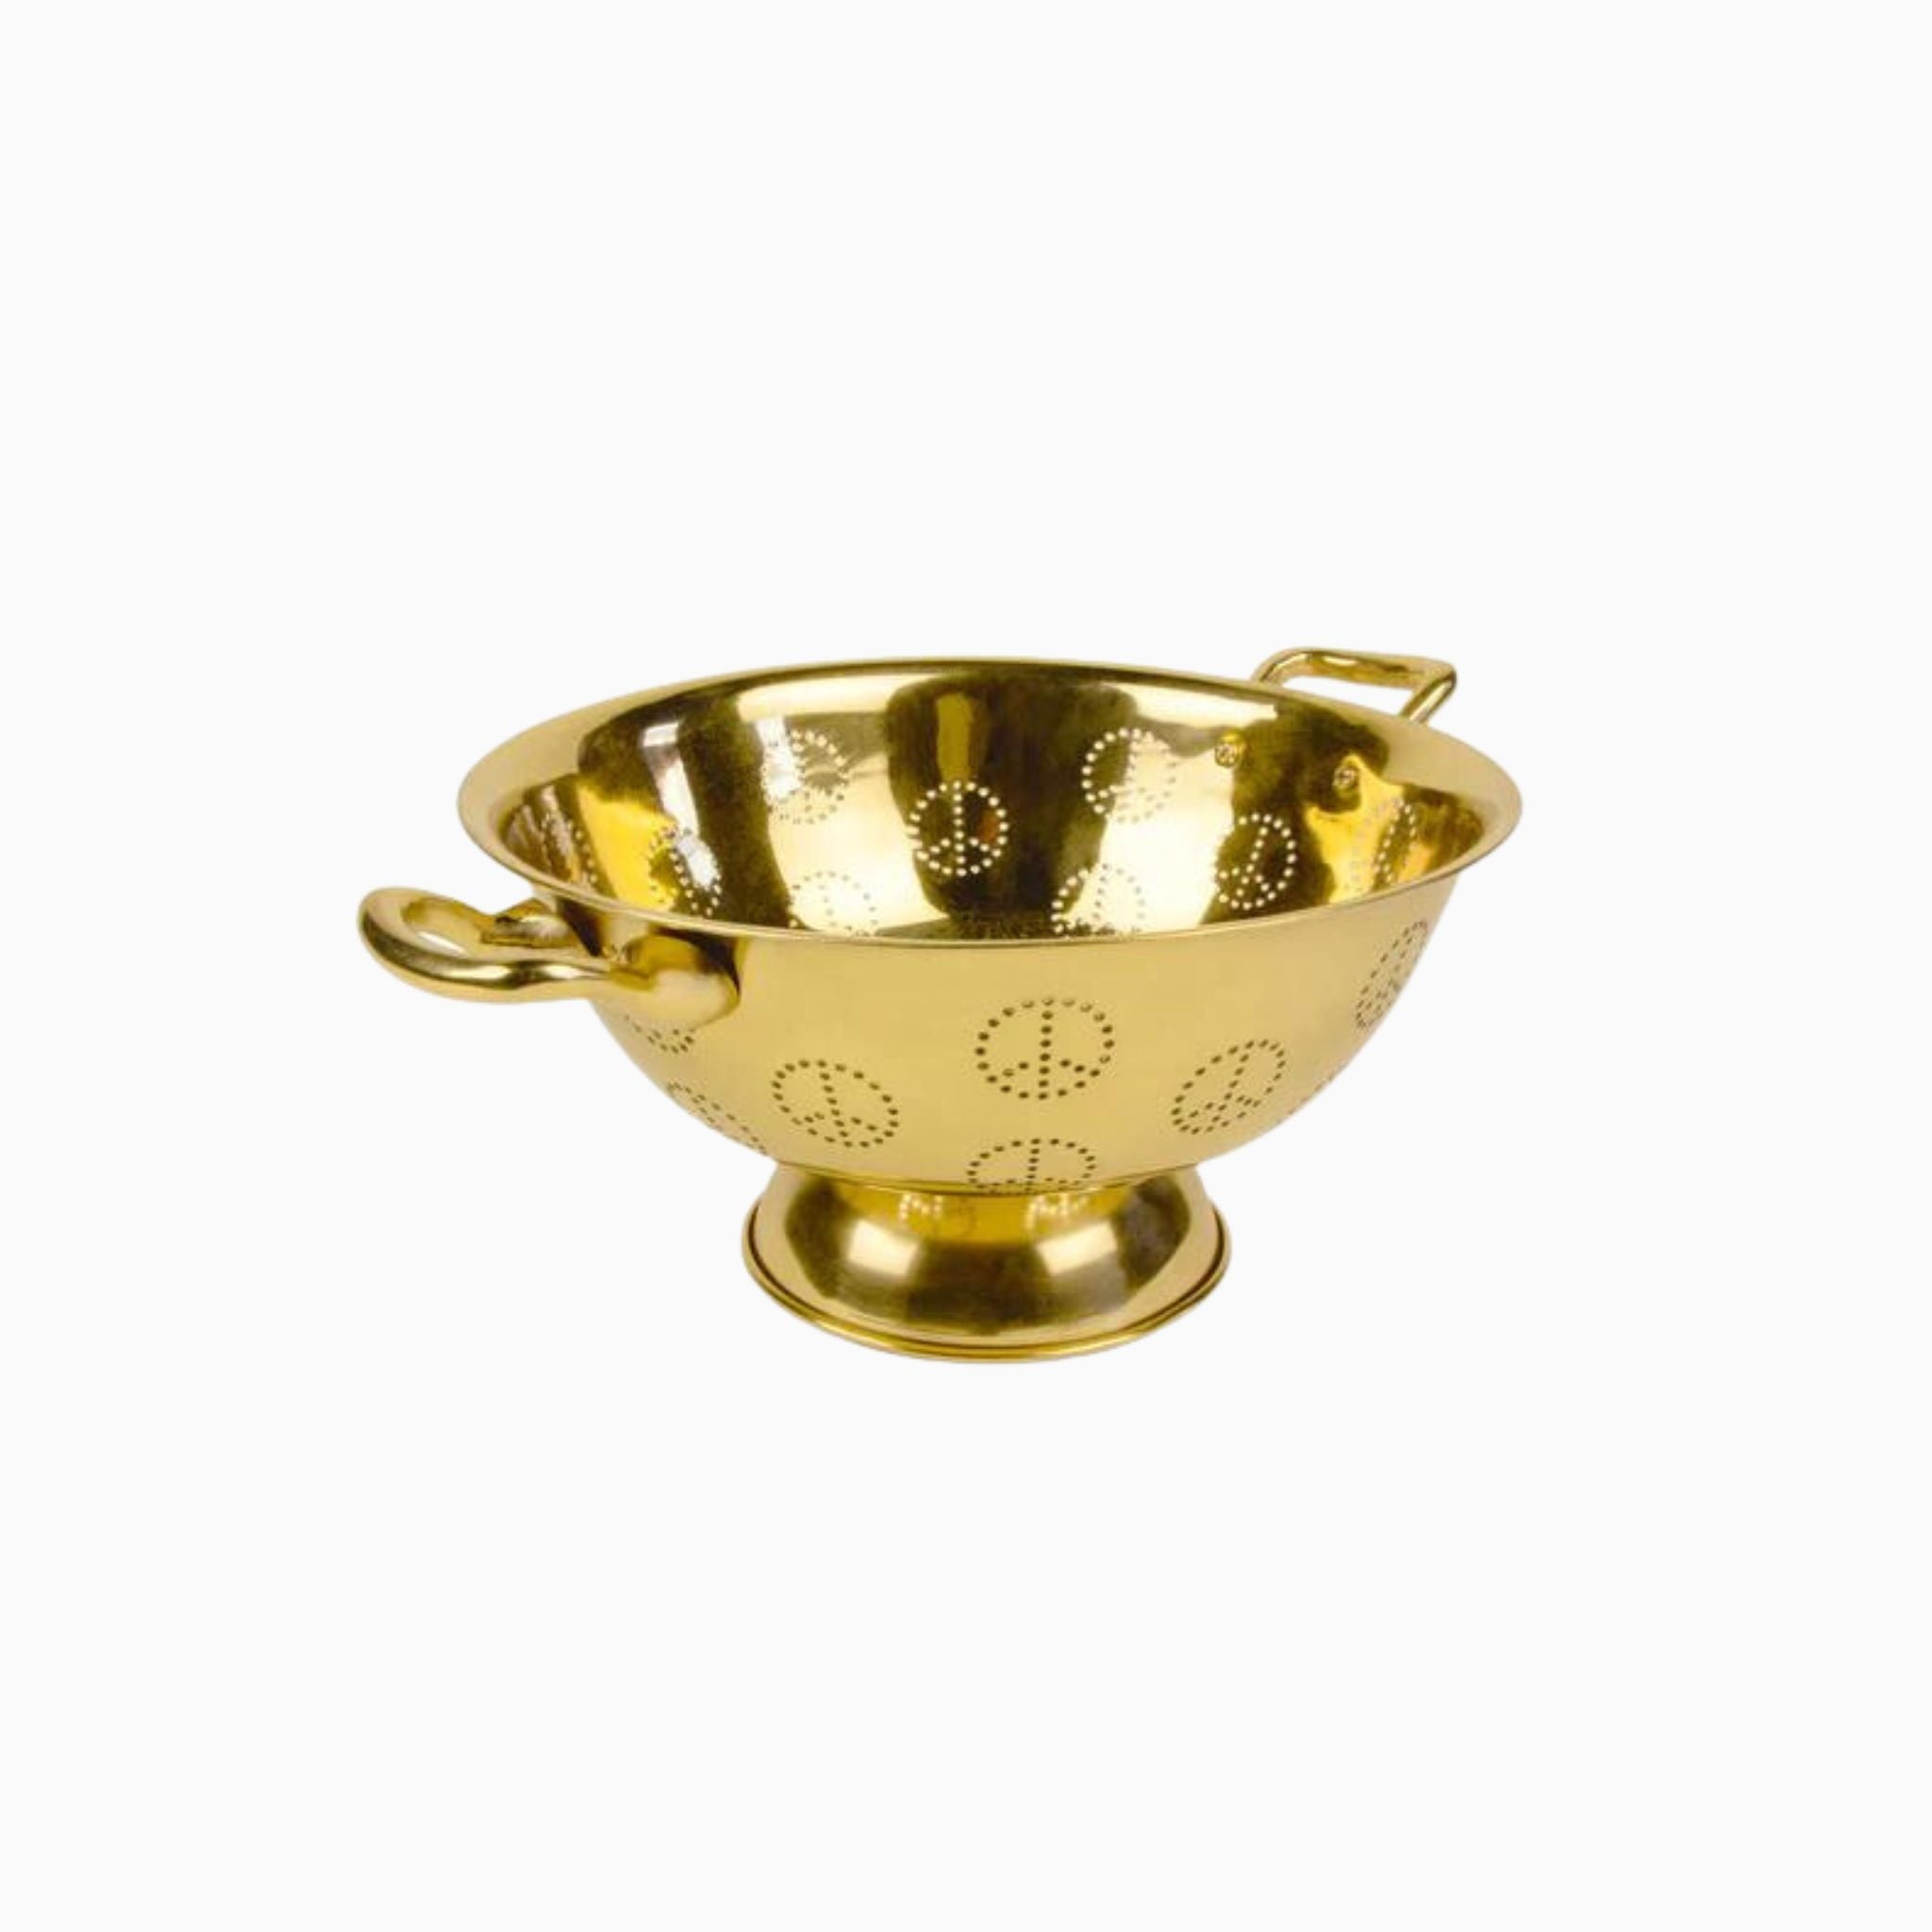 Simply Elevated - The Brass Peace Colander may be the most adorable sieve we've ever seen. Made from shiny solid brass and featuring little peace signs comprised of holes for liquids to seep through, the colander is sure to delight cooks and guests alike.